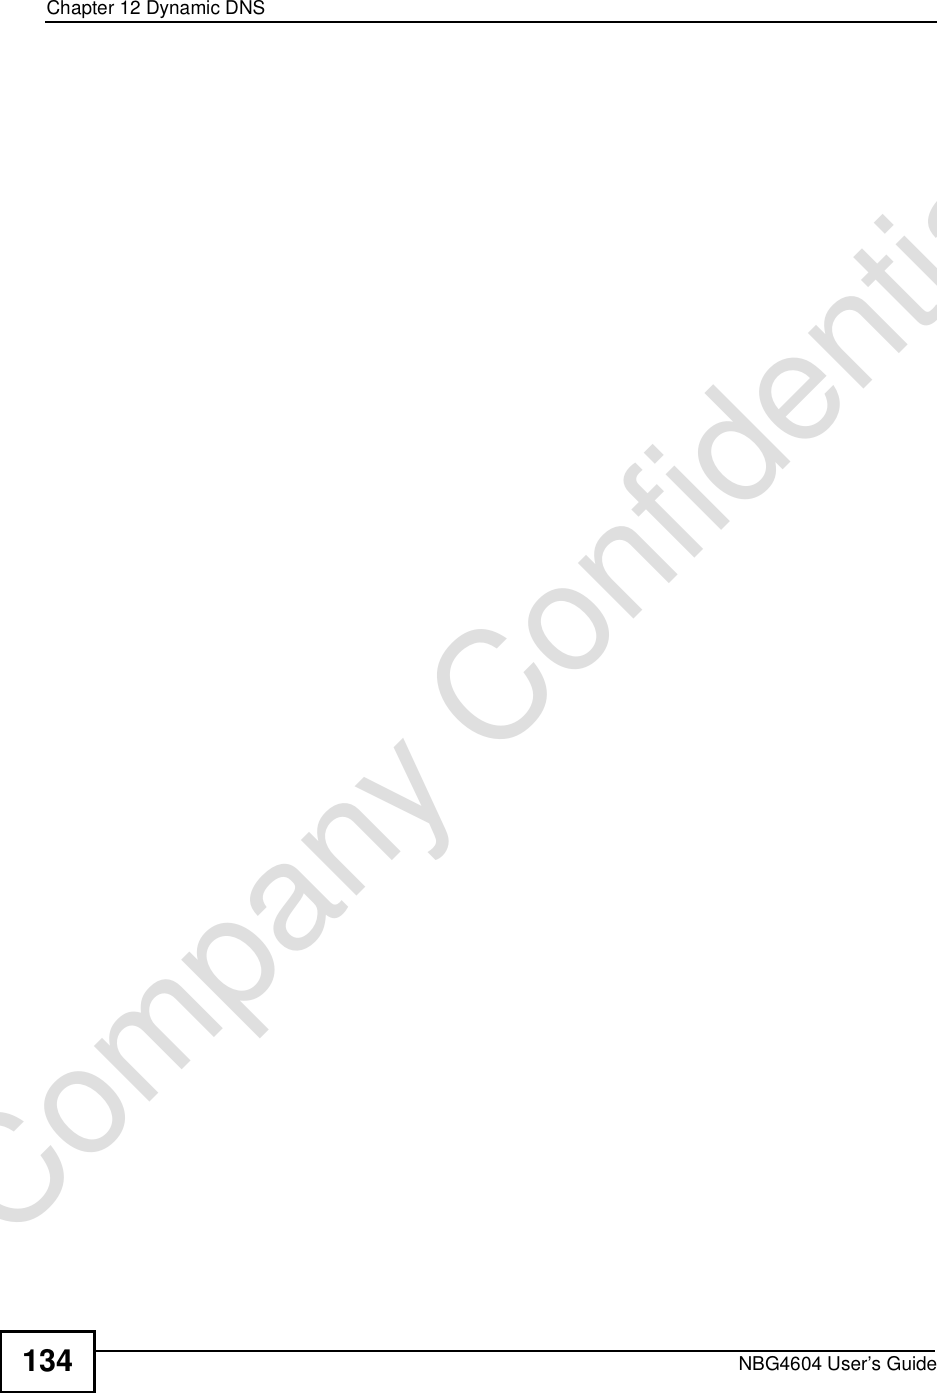 Chapter 12Dynamic DNSNBG4604 User’s Guide134Company Confidential